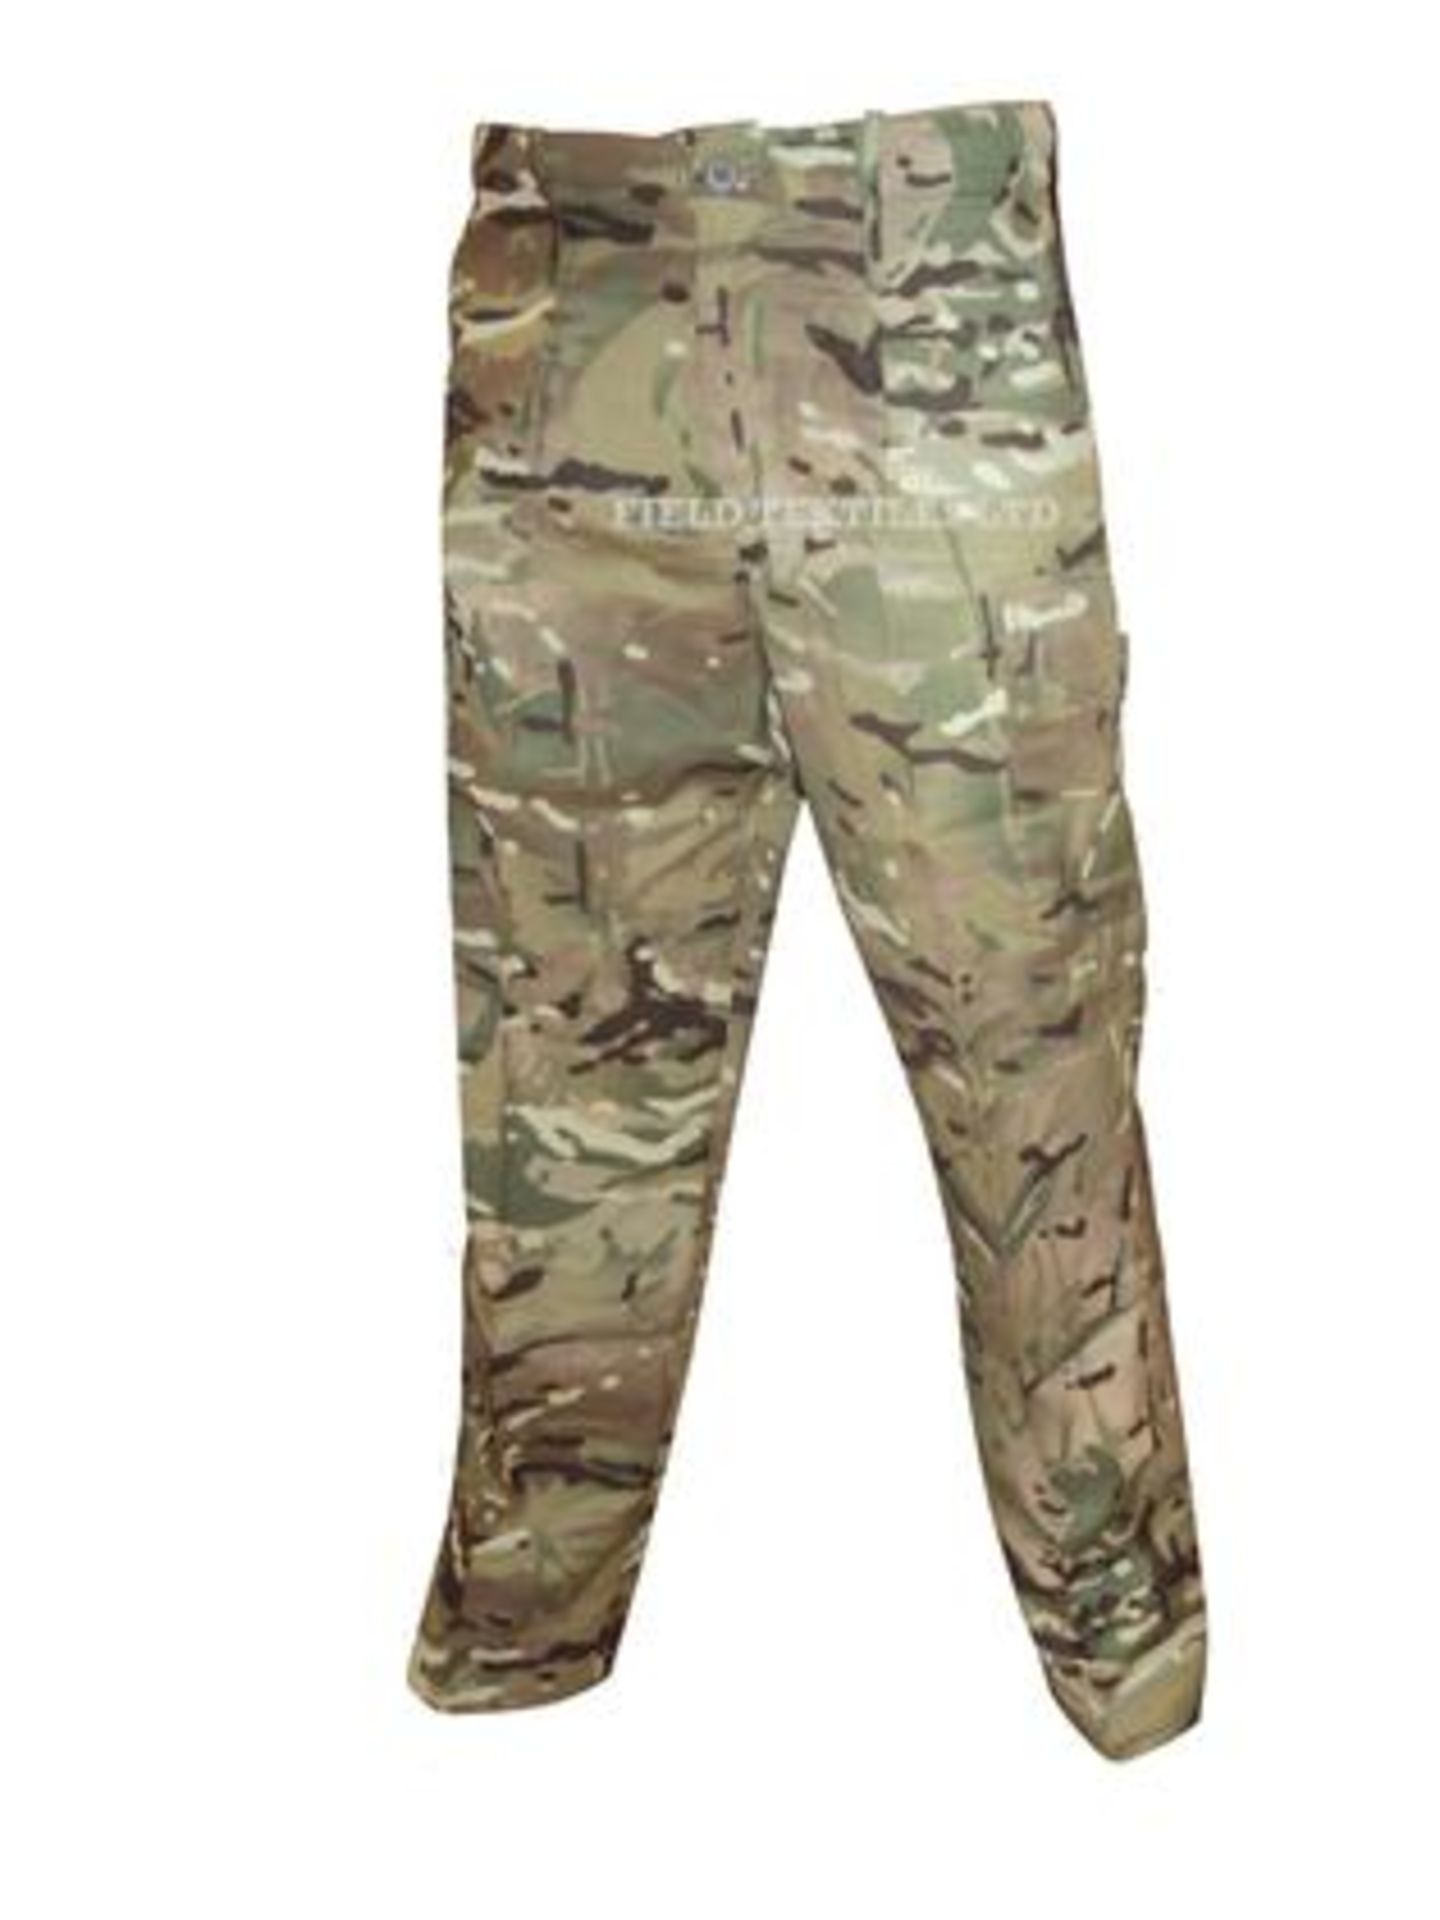 Pack of 10 - MTP Combat Trousers - Mix of Sizes - Grade 1